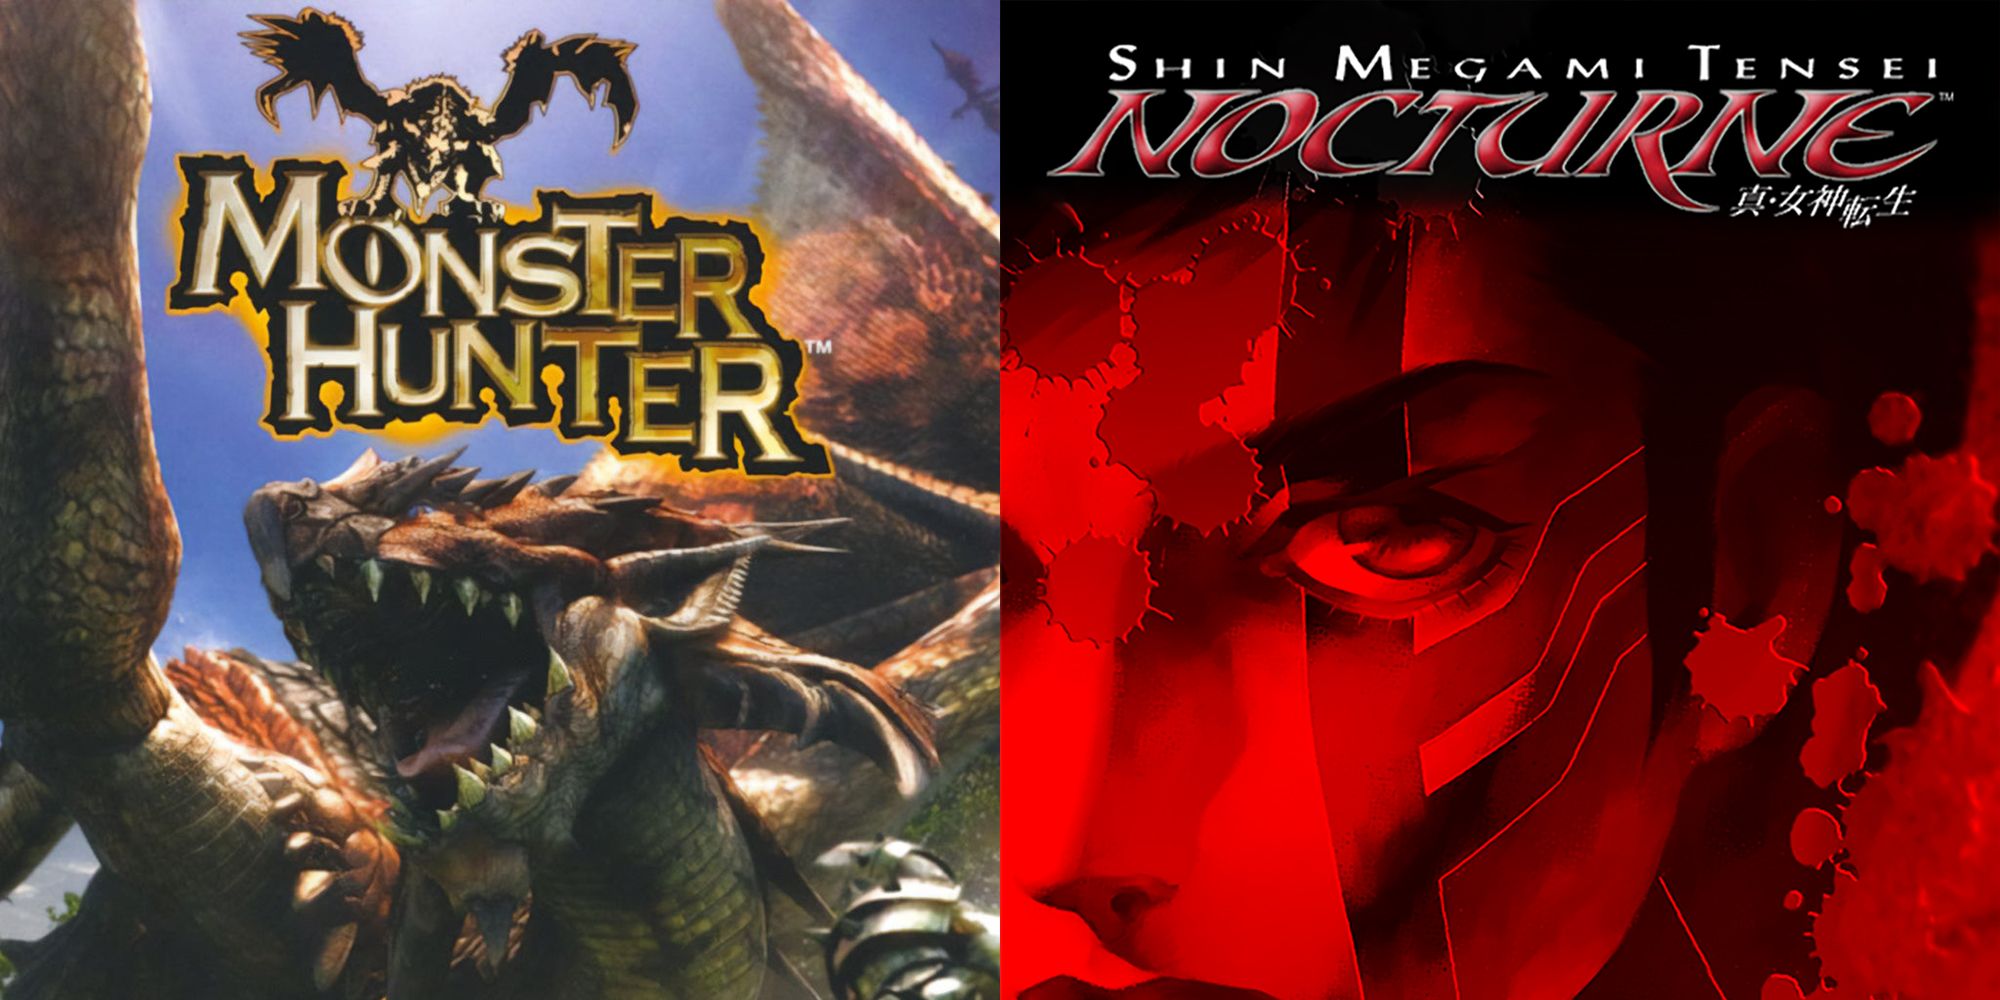 monster hunter and nocturne ps2 games